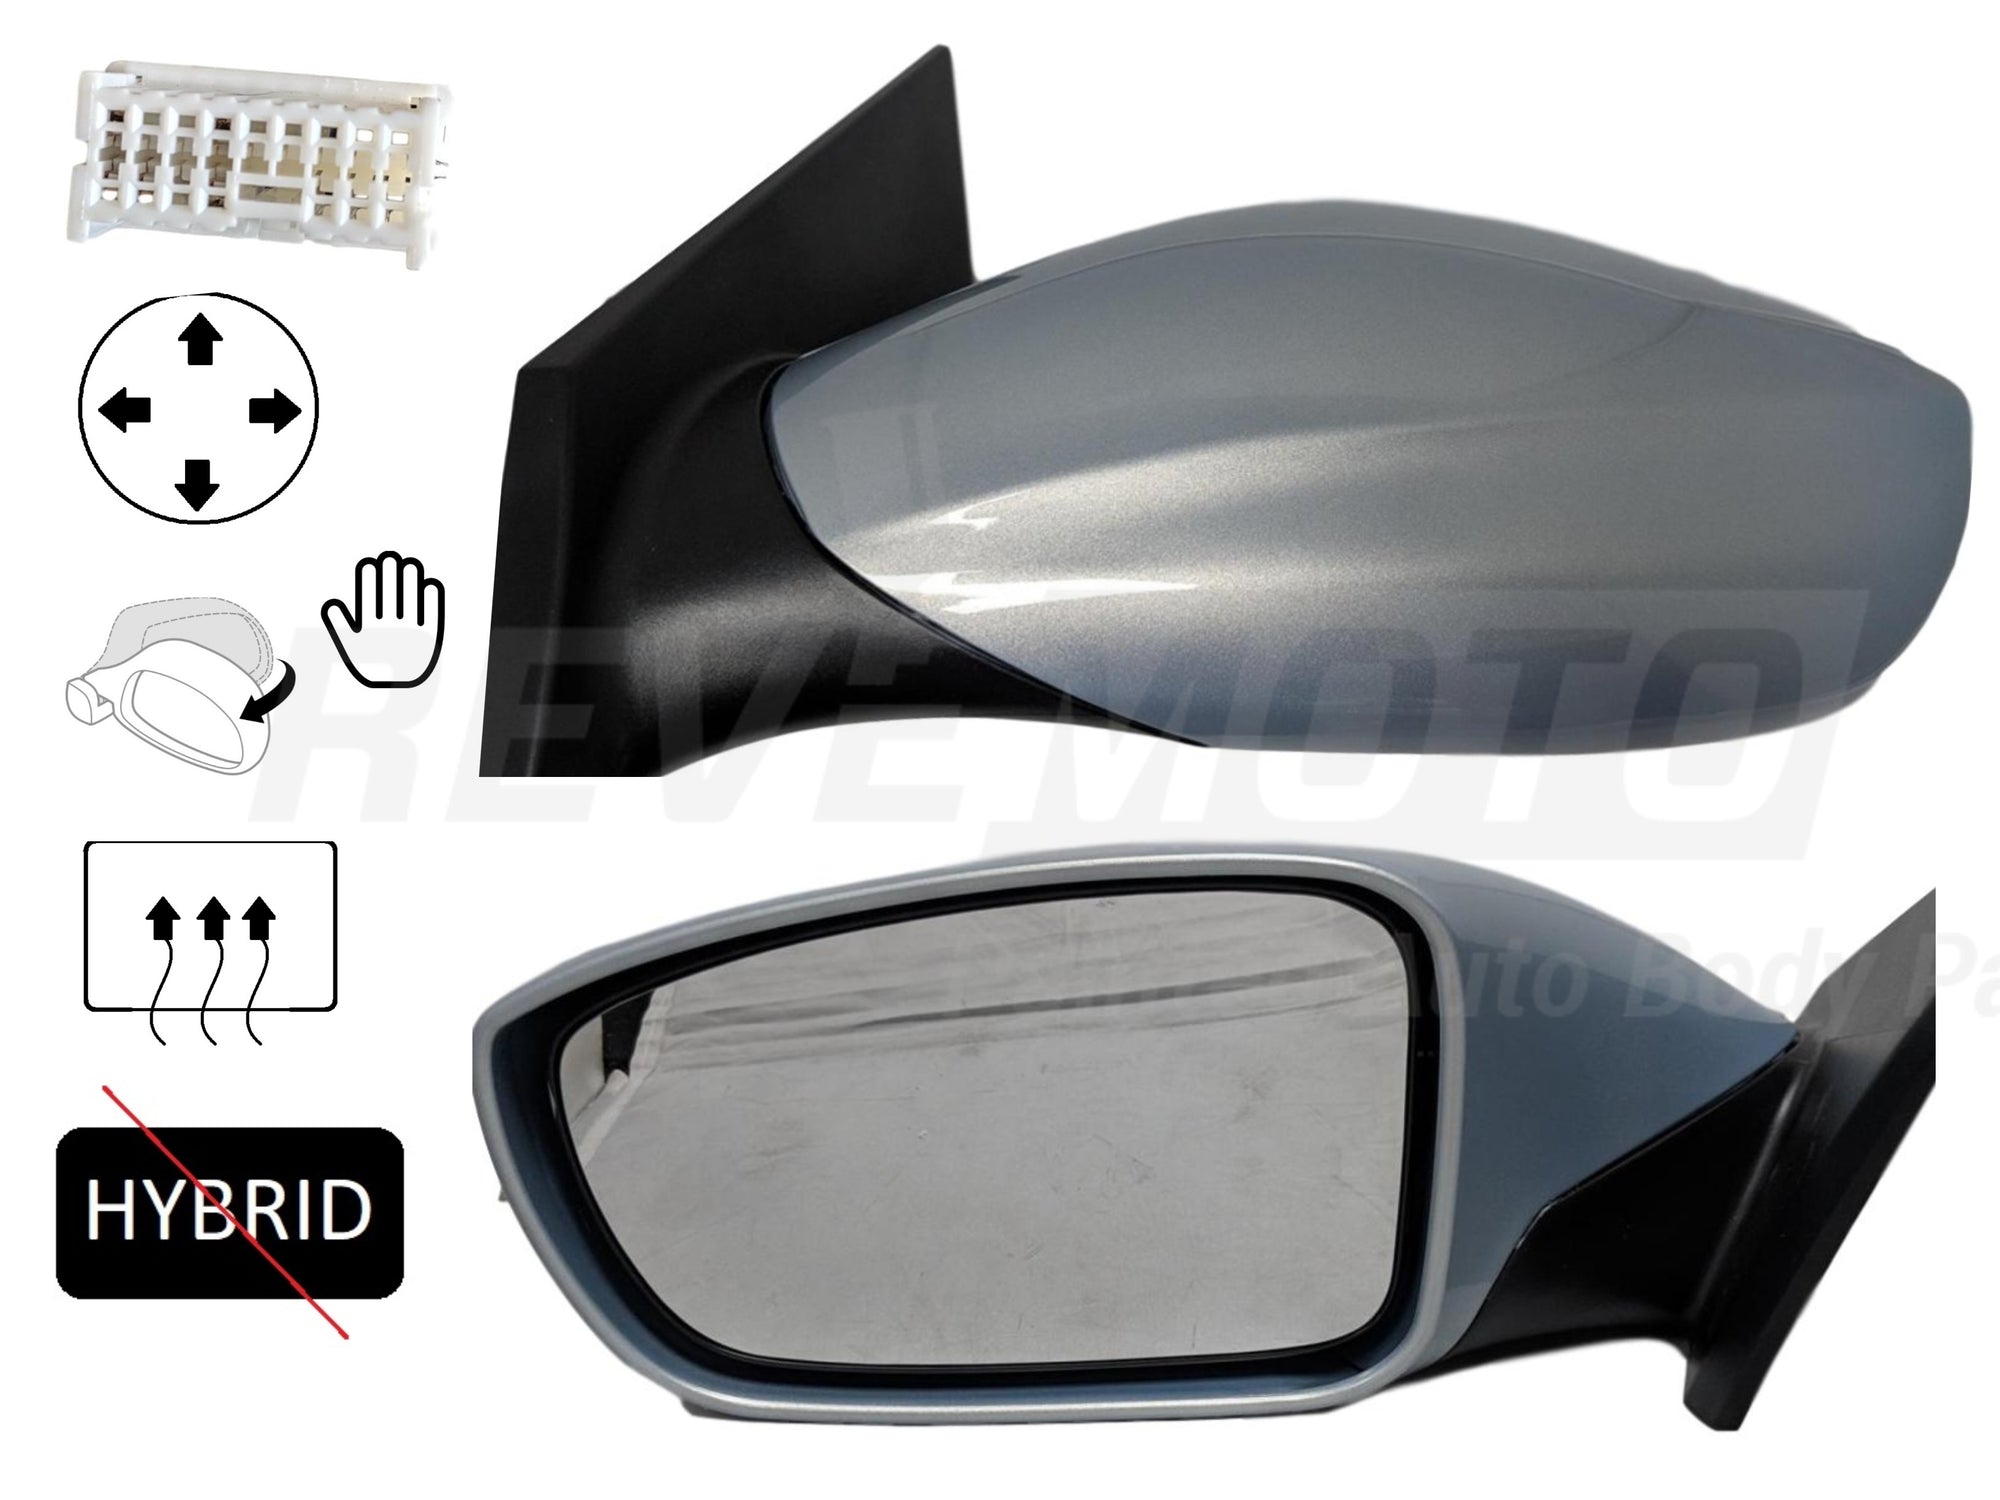 2012_Hyundai_Sonata_Driver_Side_View_Mirror_Heated_wo_Turn_Signal_Light_Power_Manual_Folding_Except_Hybrid_Painted_Iridescent_Silver_Blue_Pearl_Z3__876103Q010